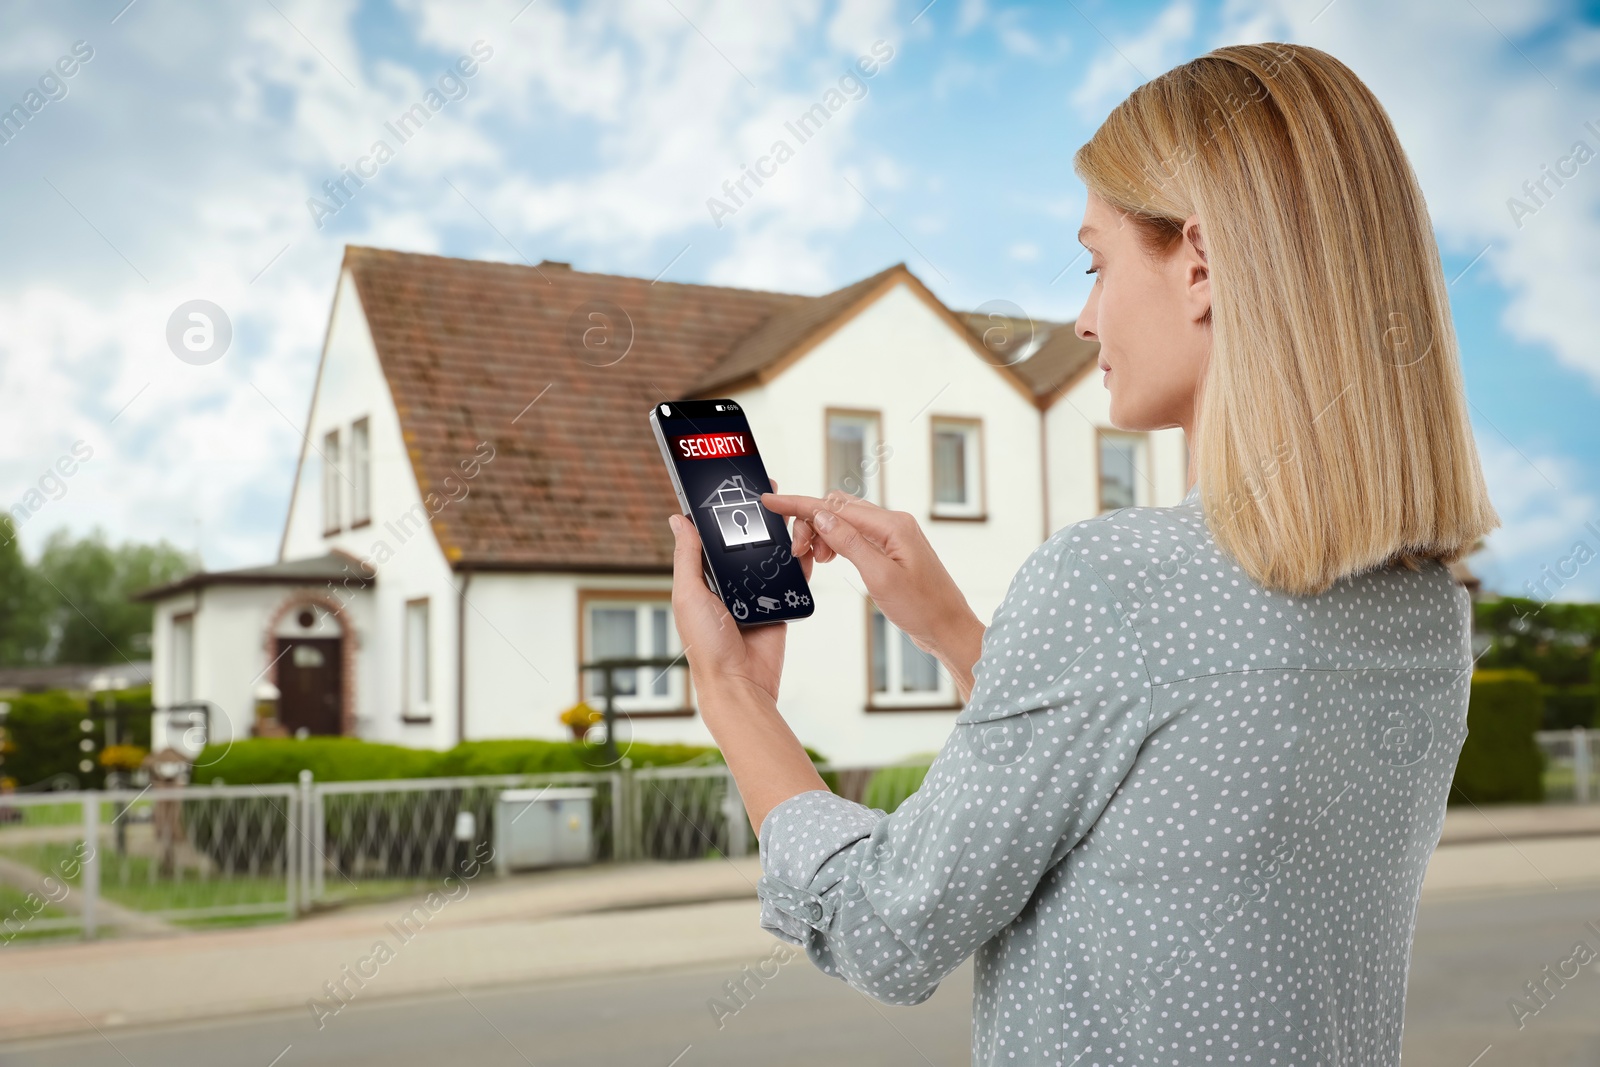 Image of Woman using home security system application on smartphone outdoors